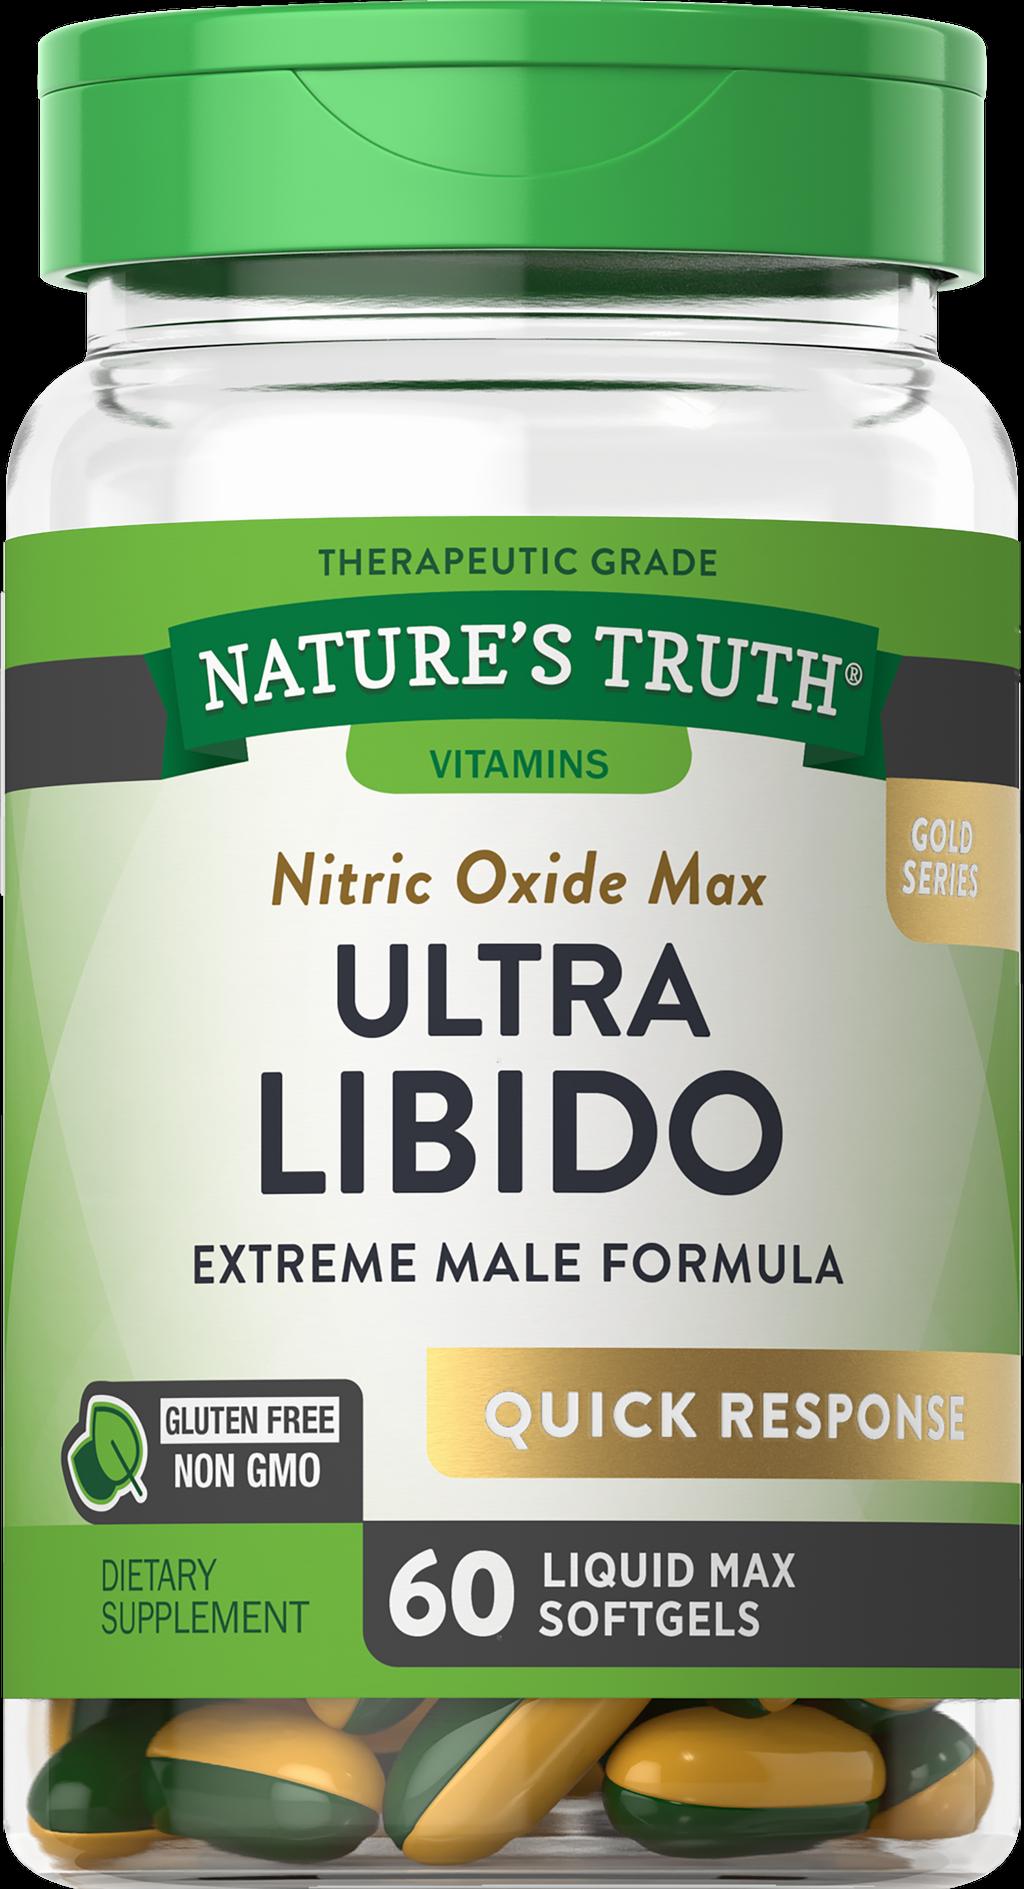 A green bottle of Natures Truth Nitric Oxide Max Ultra Libido, a dietary supplement.